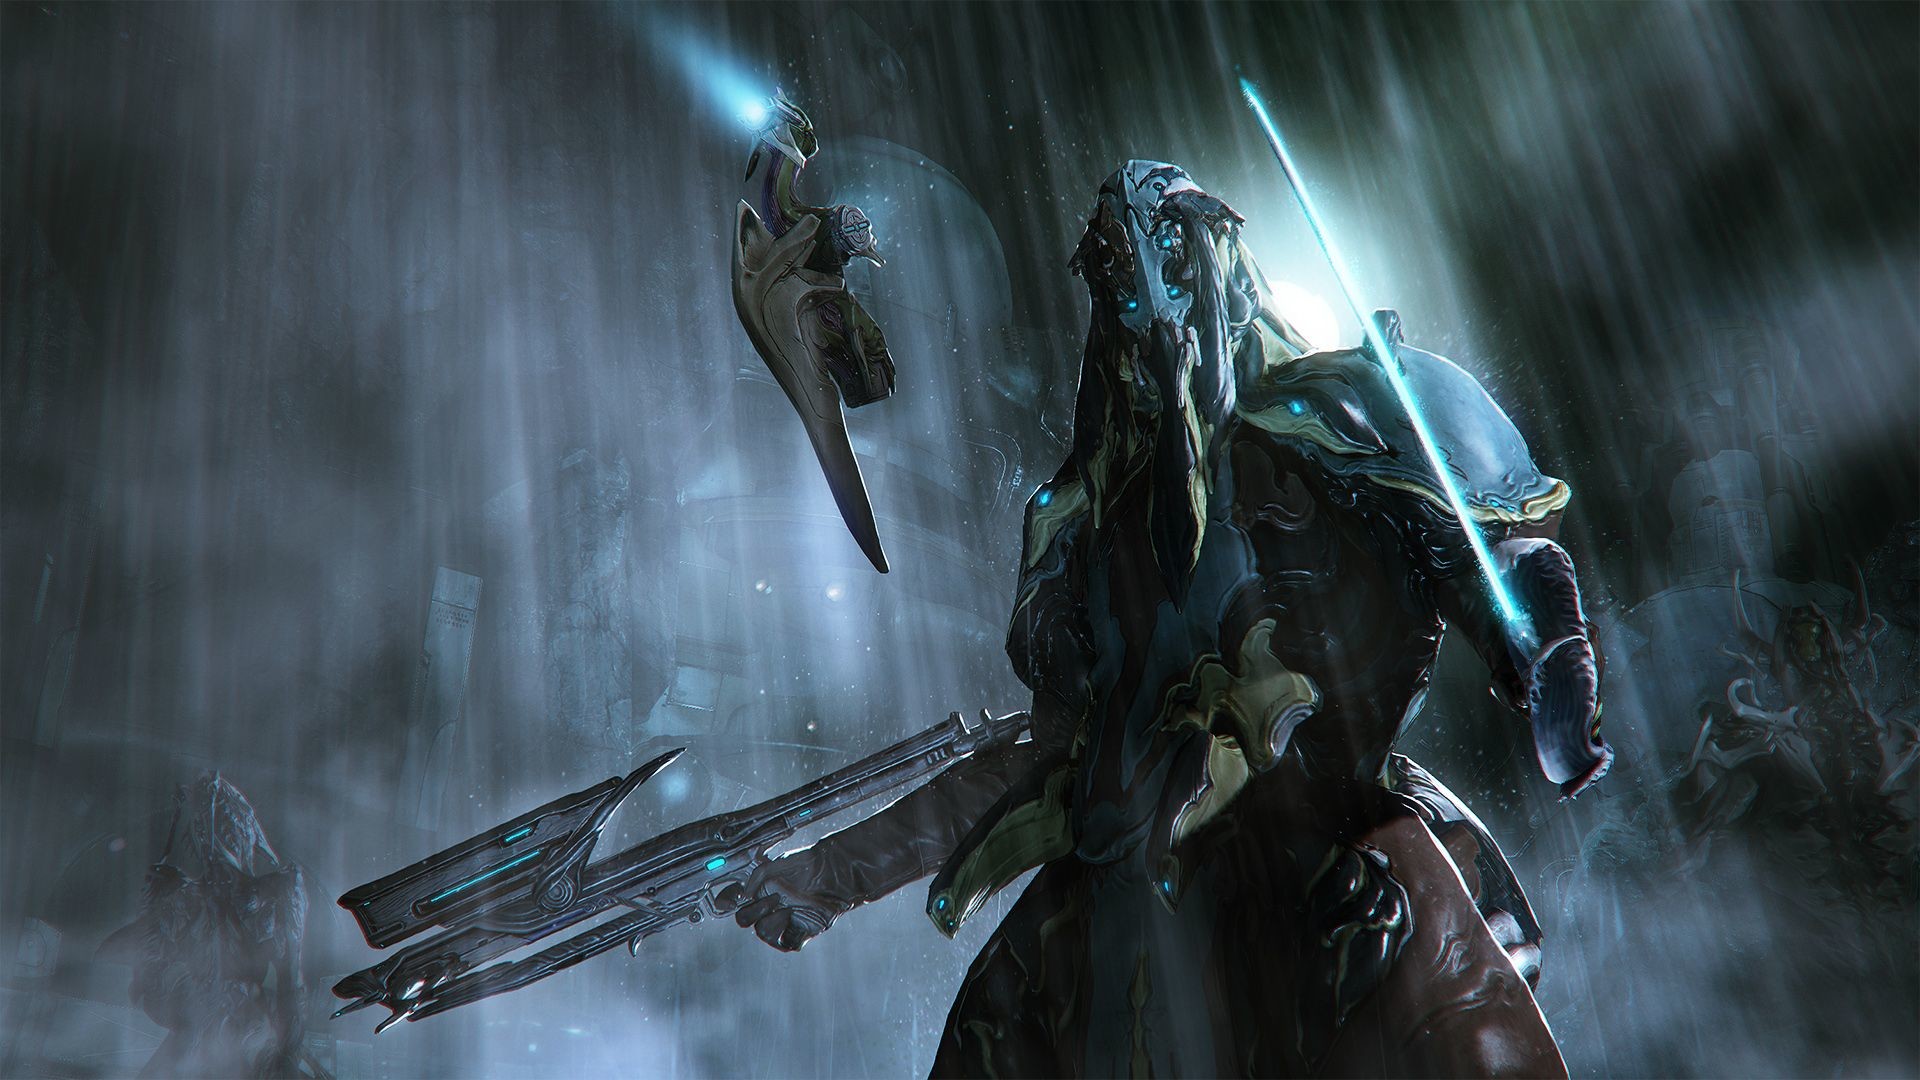 1920x1080 3840x2160 175 Warframe HD Wallpapers | Background Images - Wallpaper Abyss">